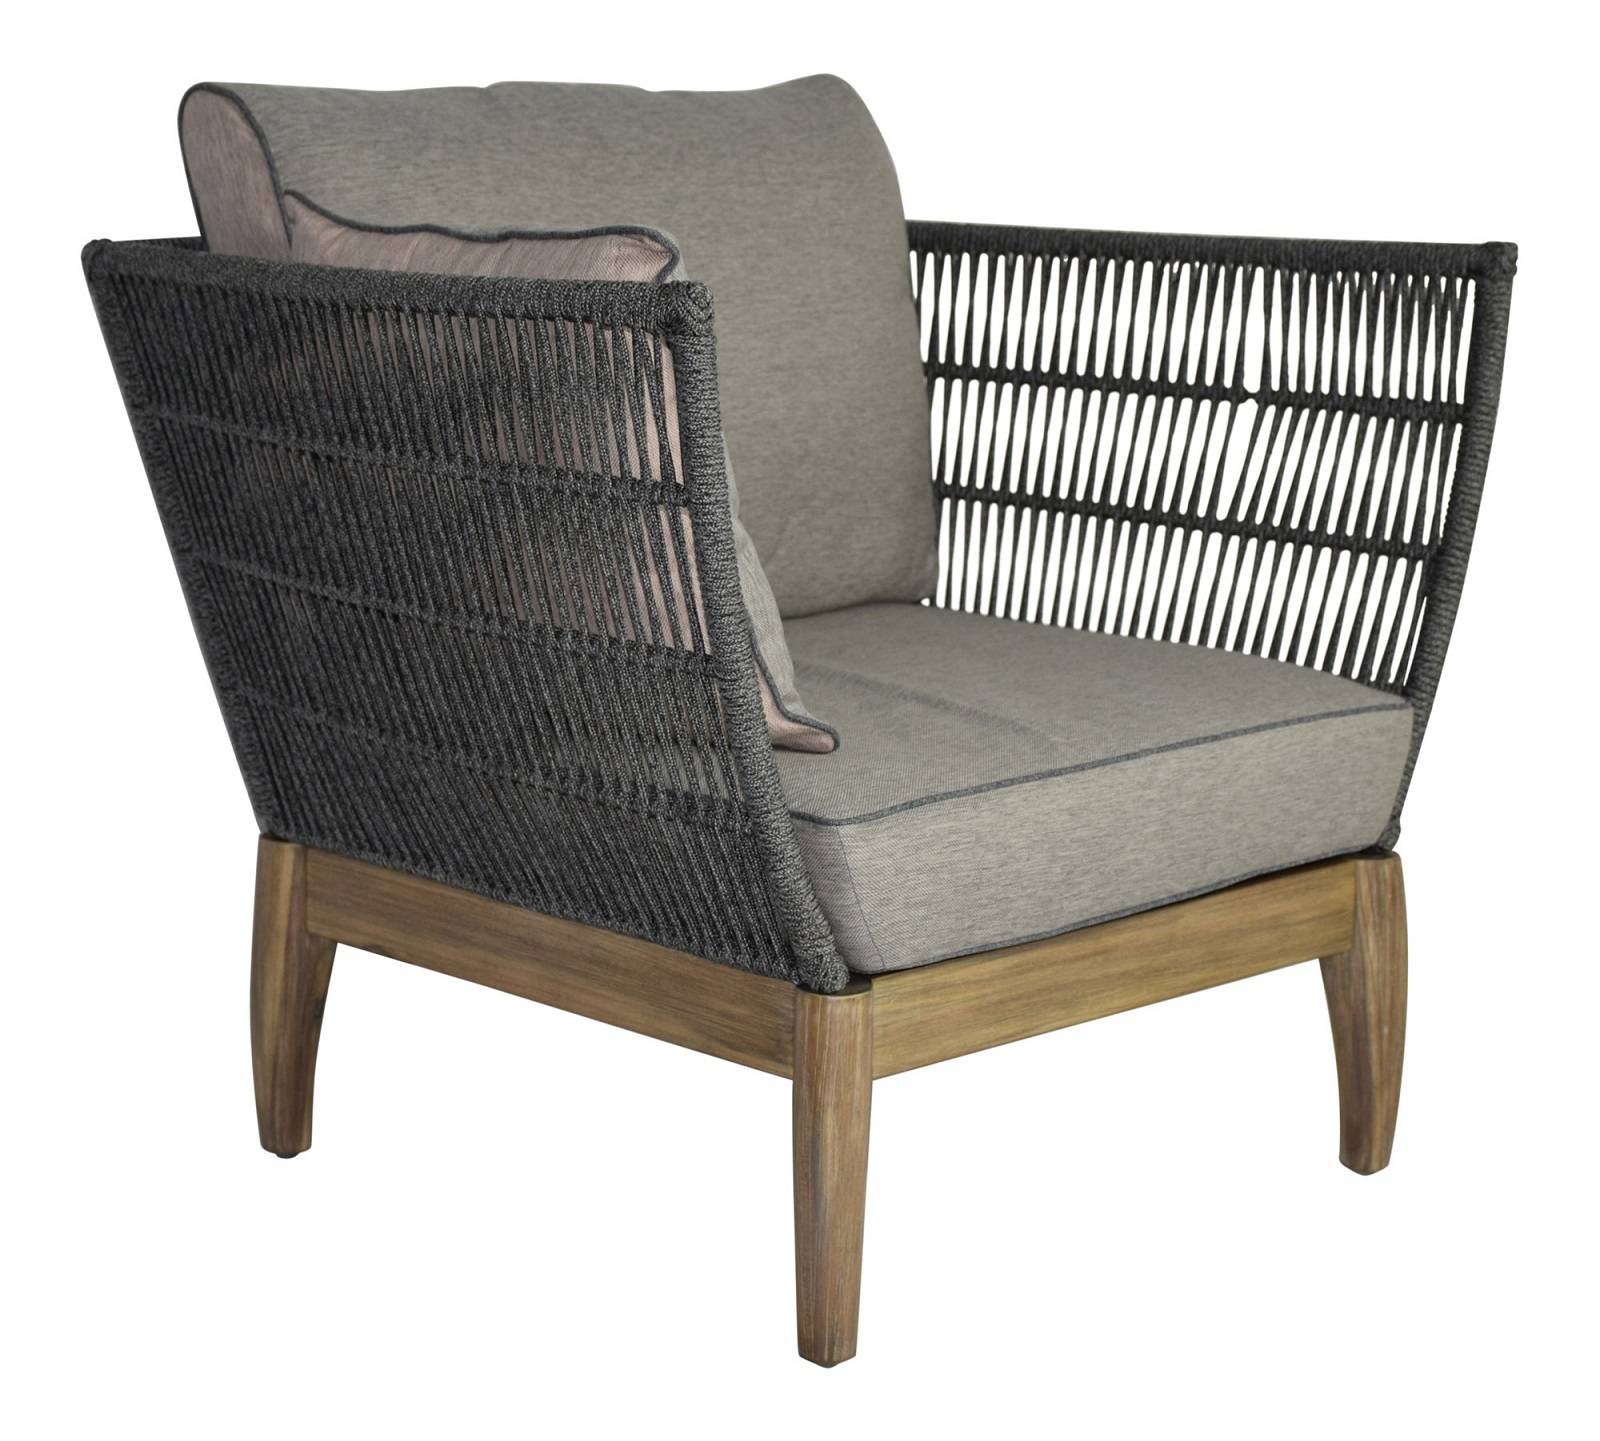 Garden furniture set Puerto Rico in grey with rope winding